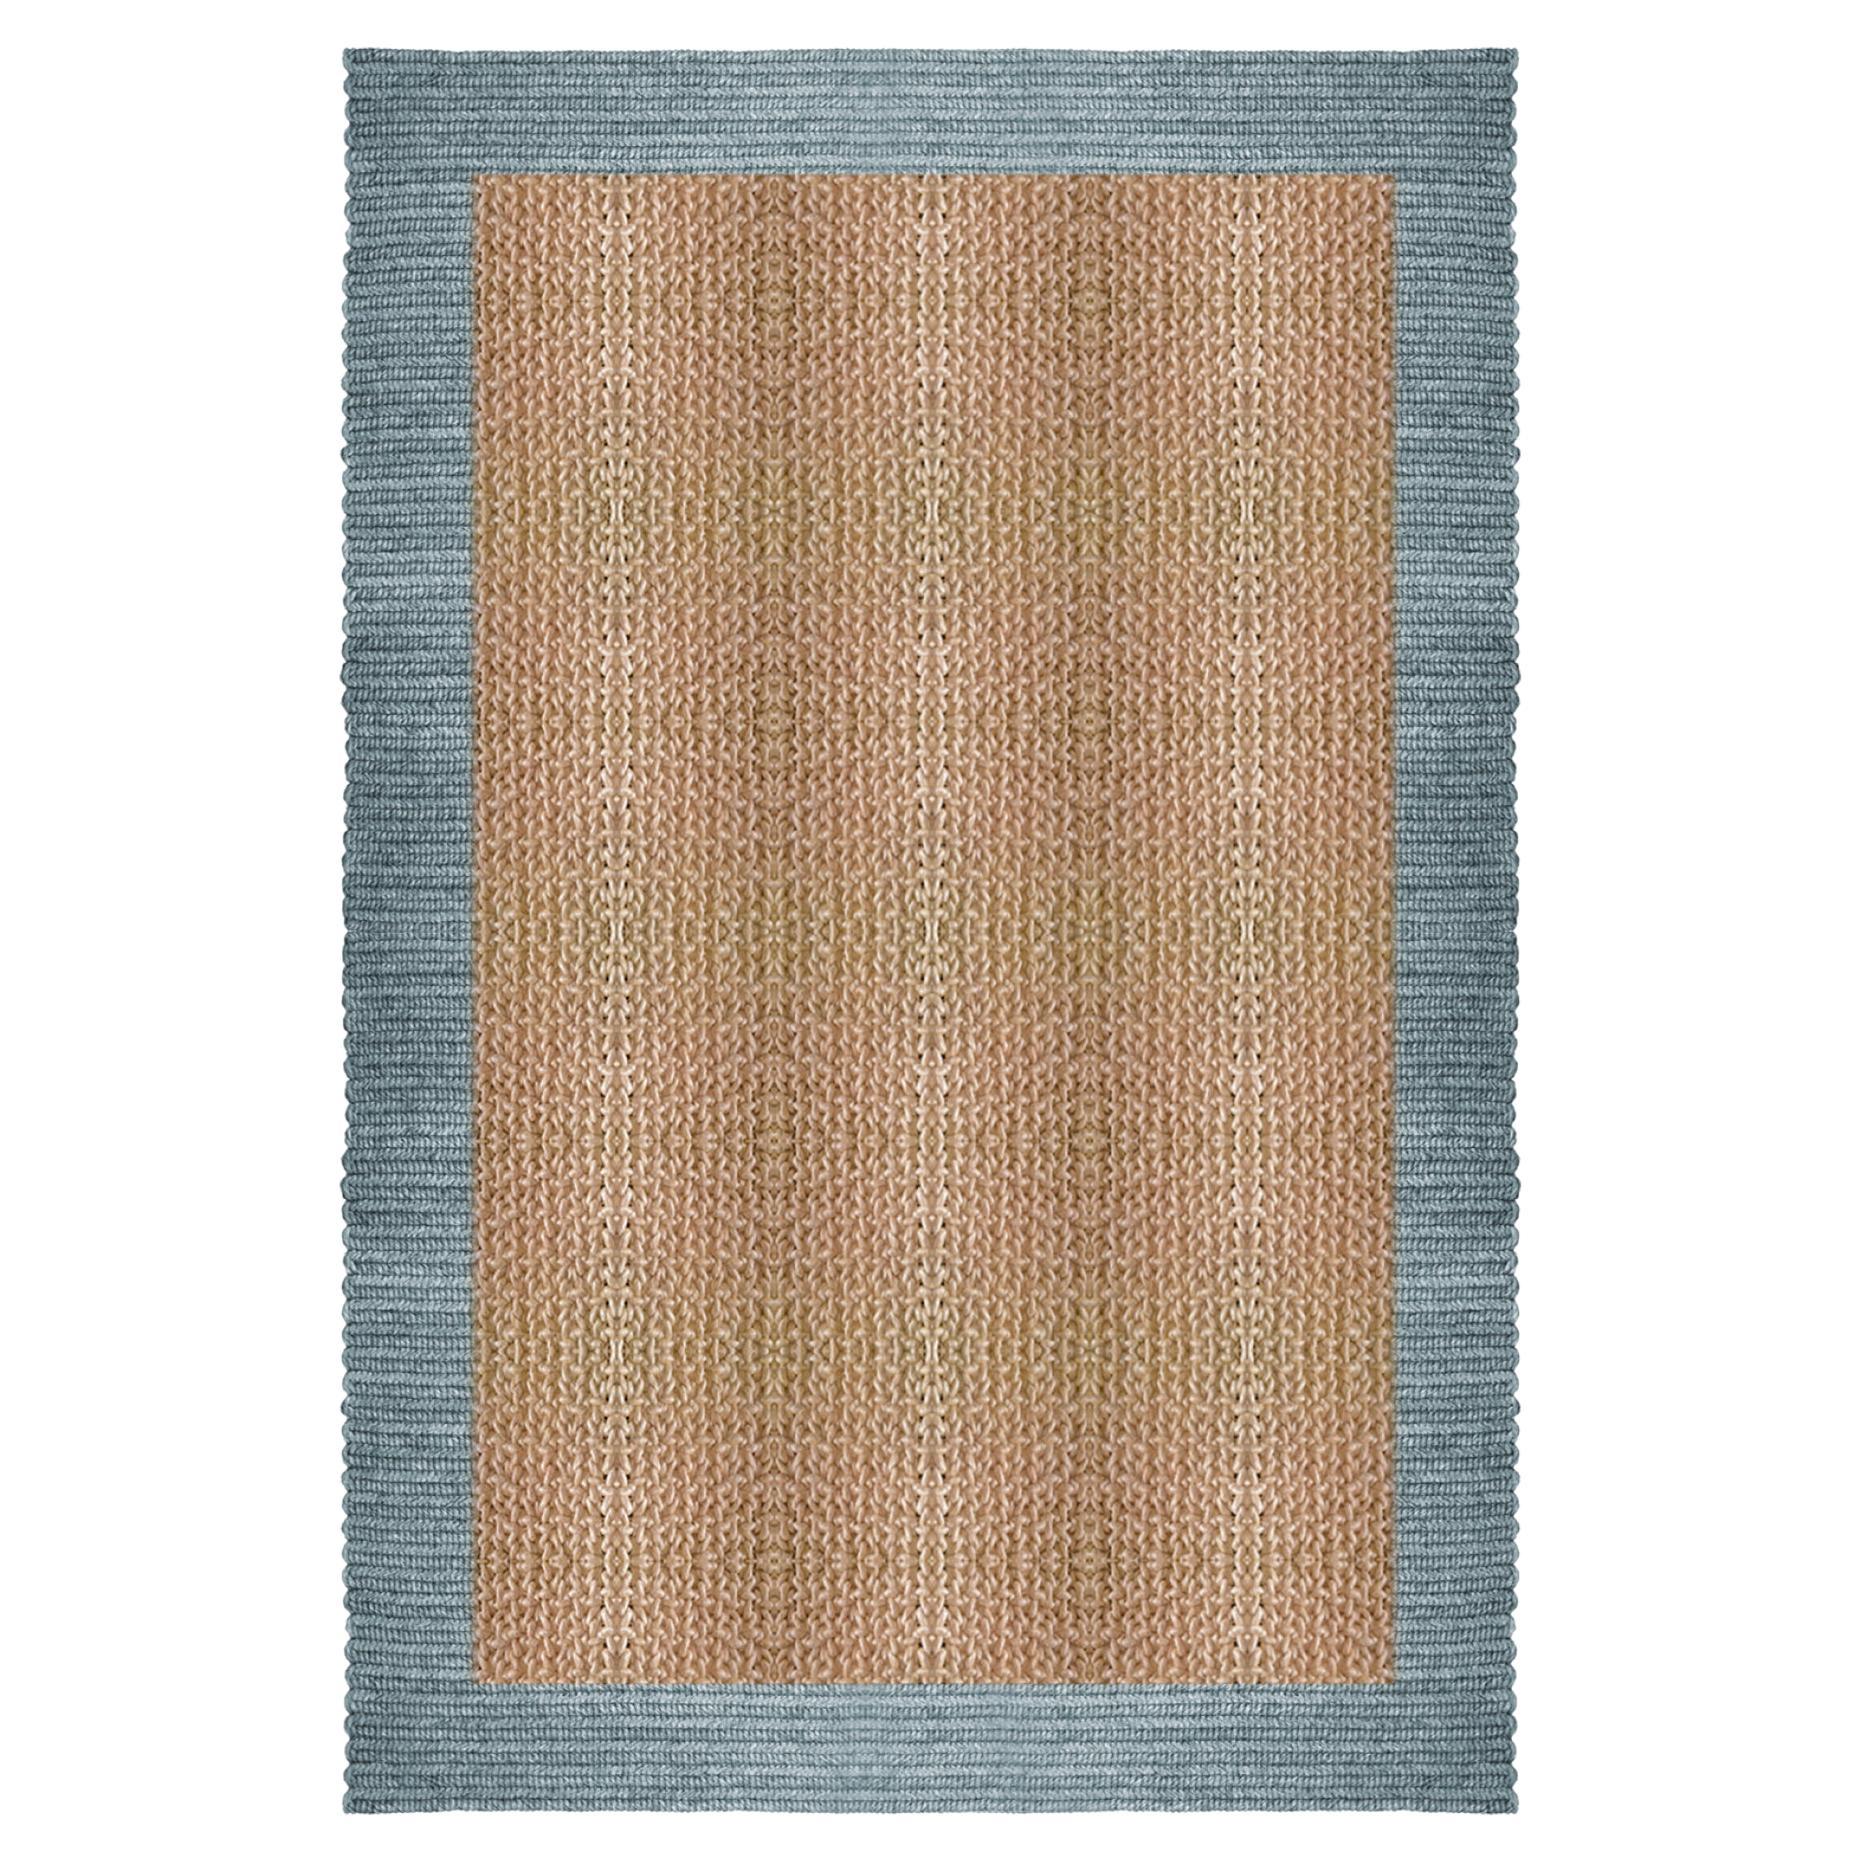 Ethical Luxury Claire Vos x Musett Design Abaca NAP Duo Rug, 260 x 390 cm For Sale